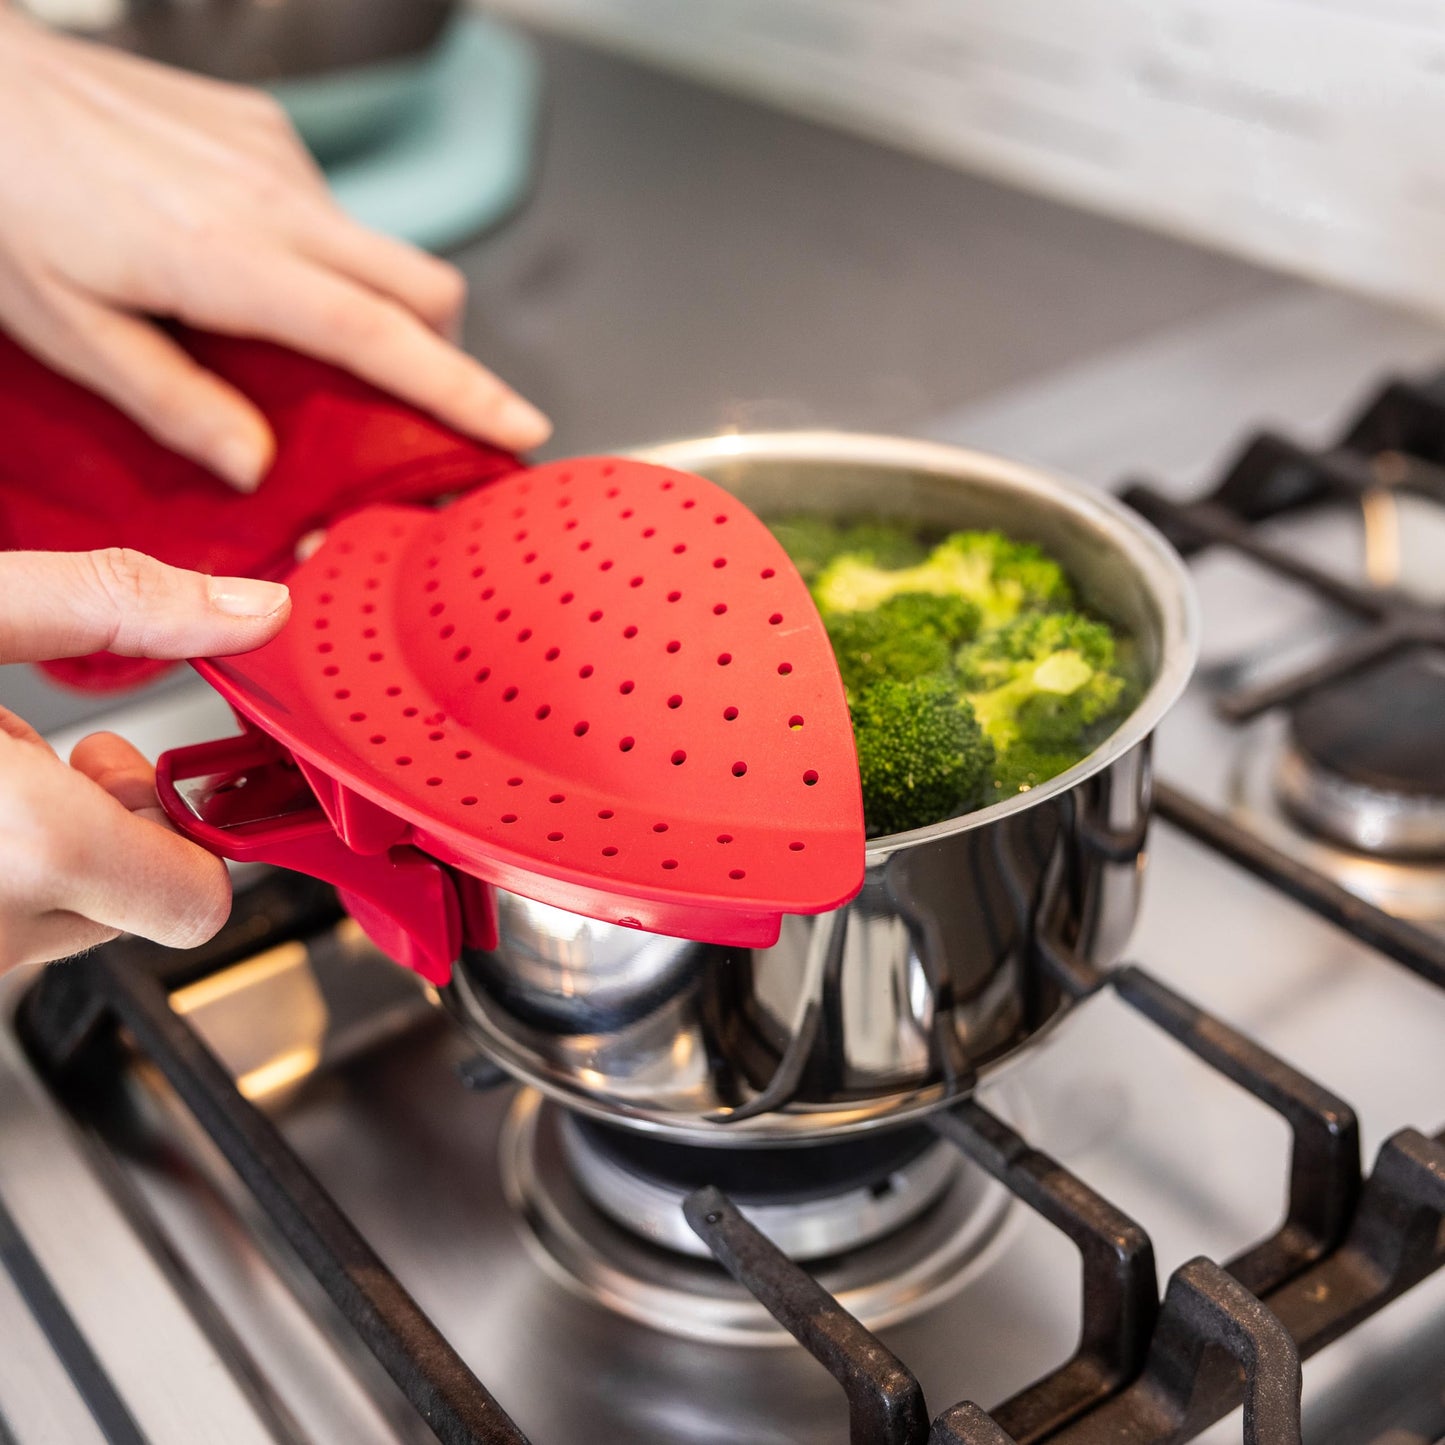 Chef's Planet Clip & Drain - Clip-on Strainer for Pots and Pans Perfect Pasta, Noodle, and Pot Strainer - Kitchen Colander, Fits on most size Pots and Pans, Red - Pot Drainer Clip On - Clip N Drain